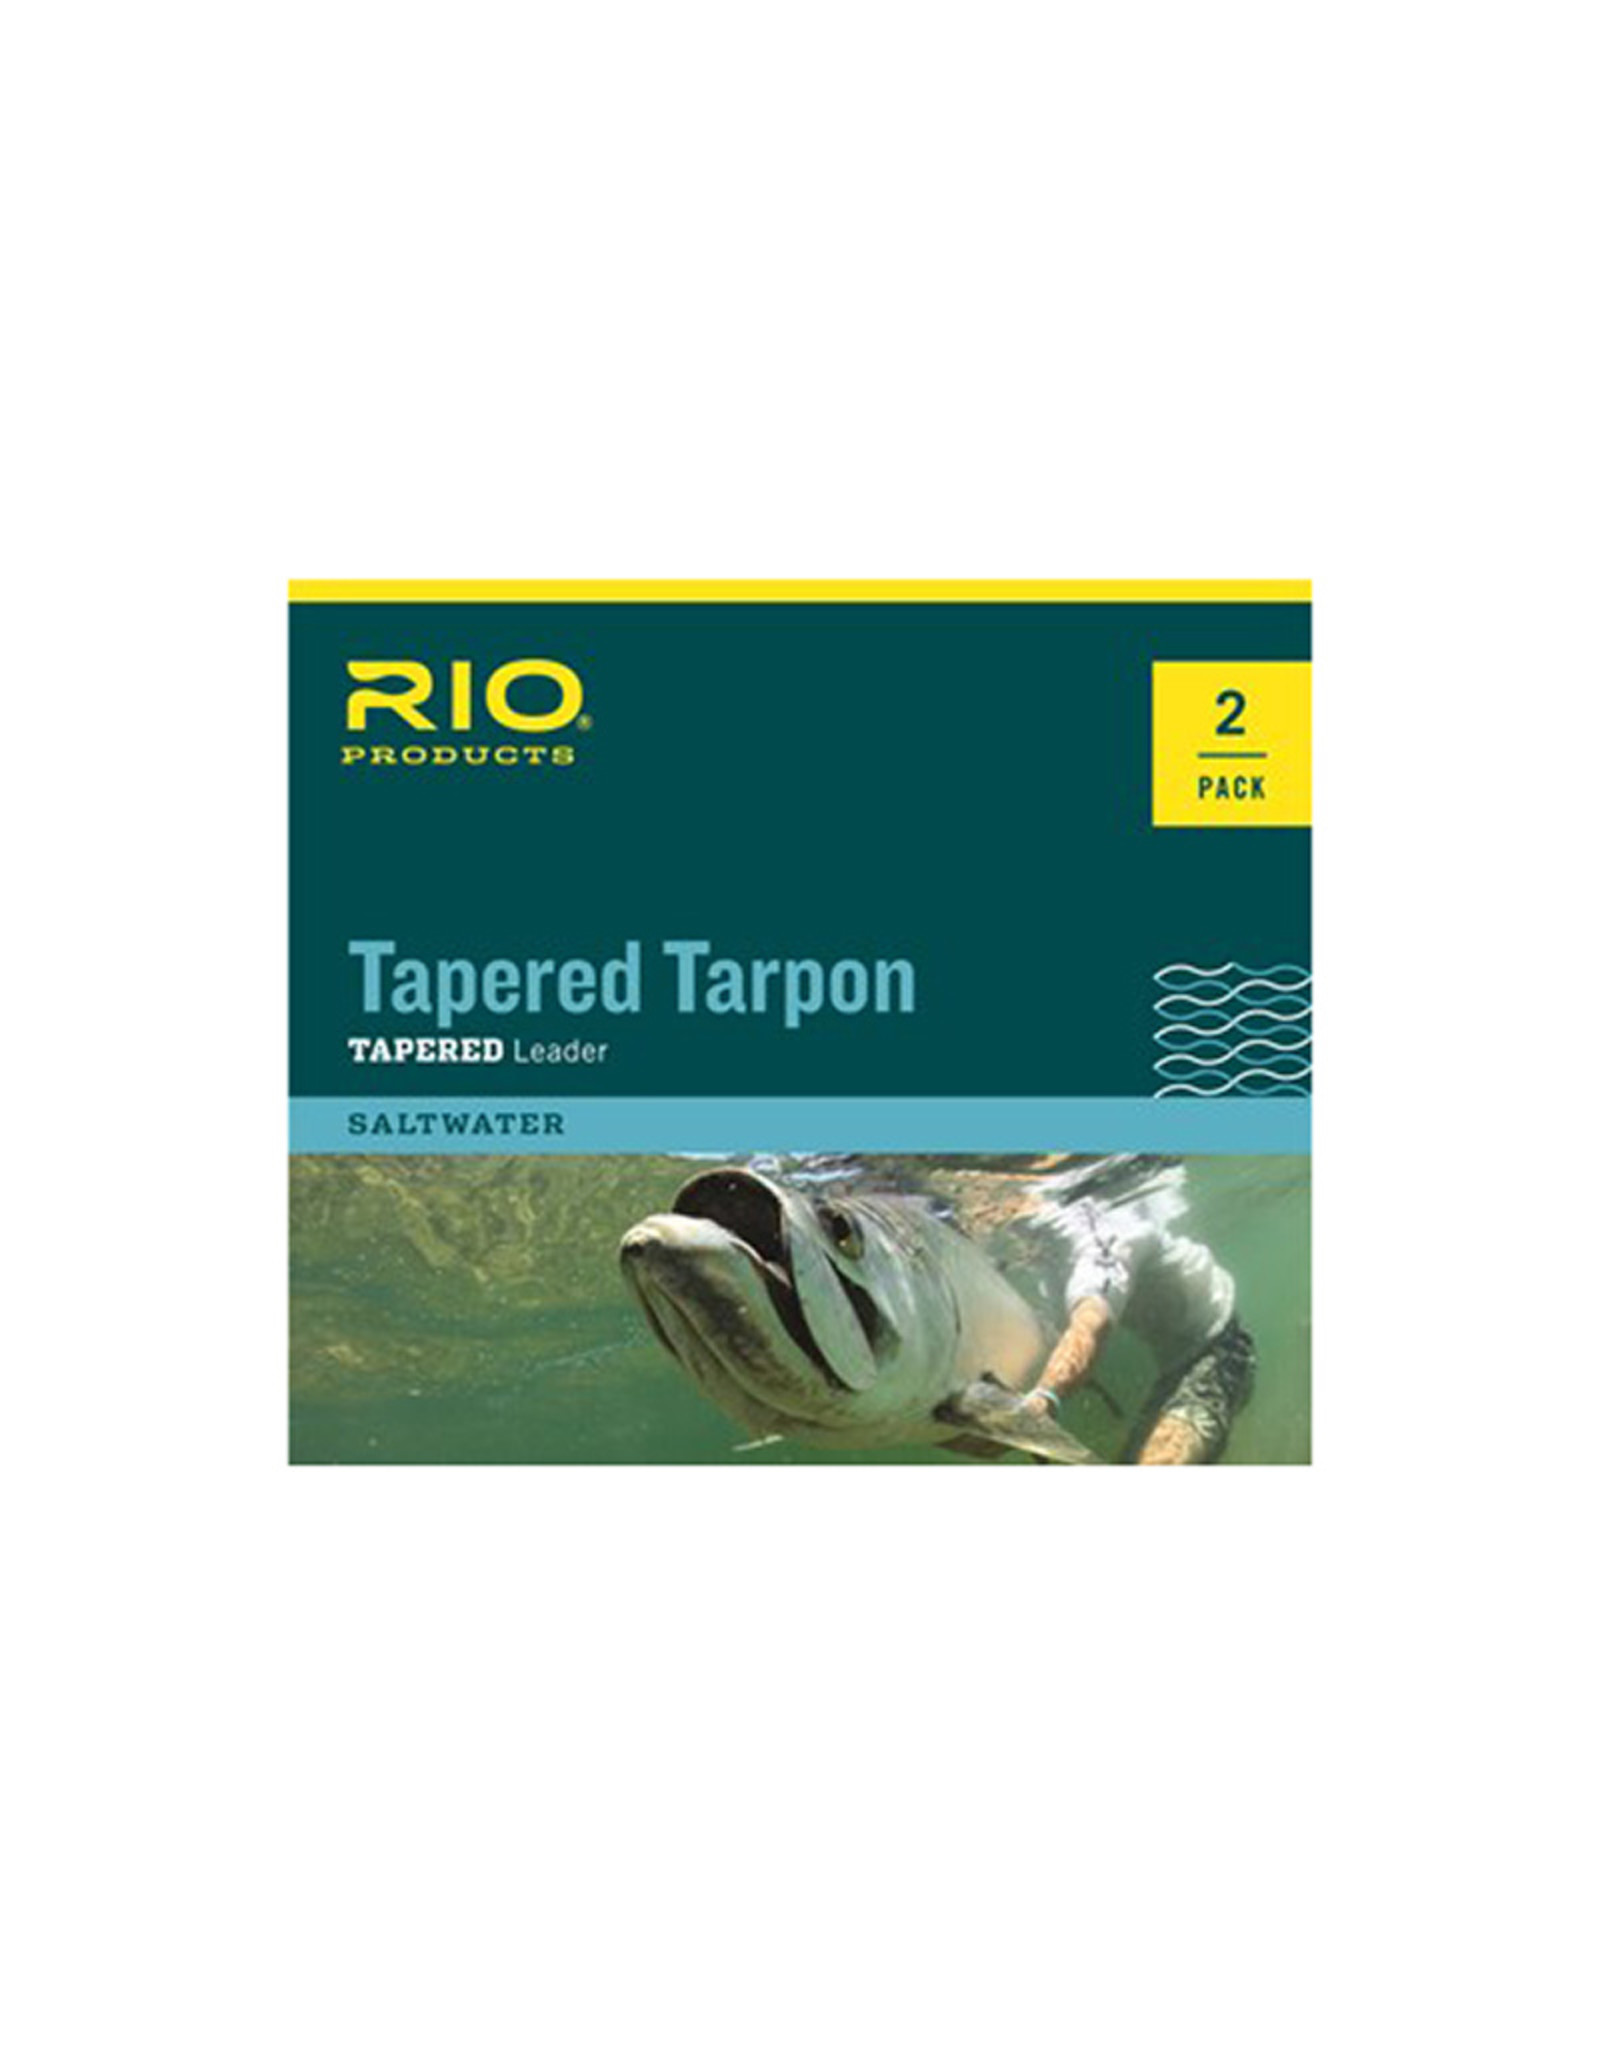 Tapered Tarpon 12ft Leader: 2 Pack - Home